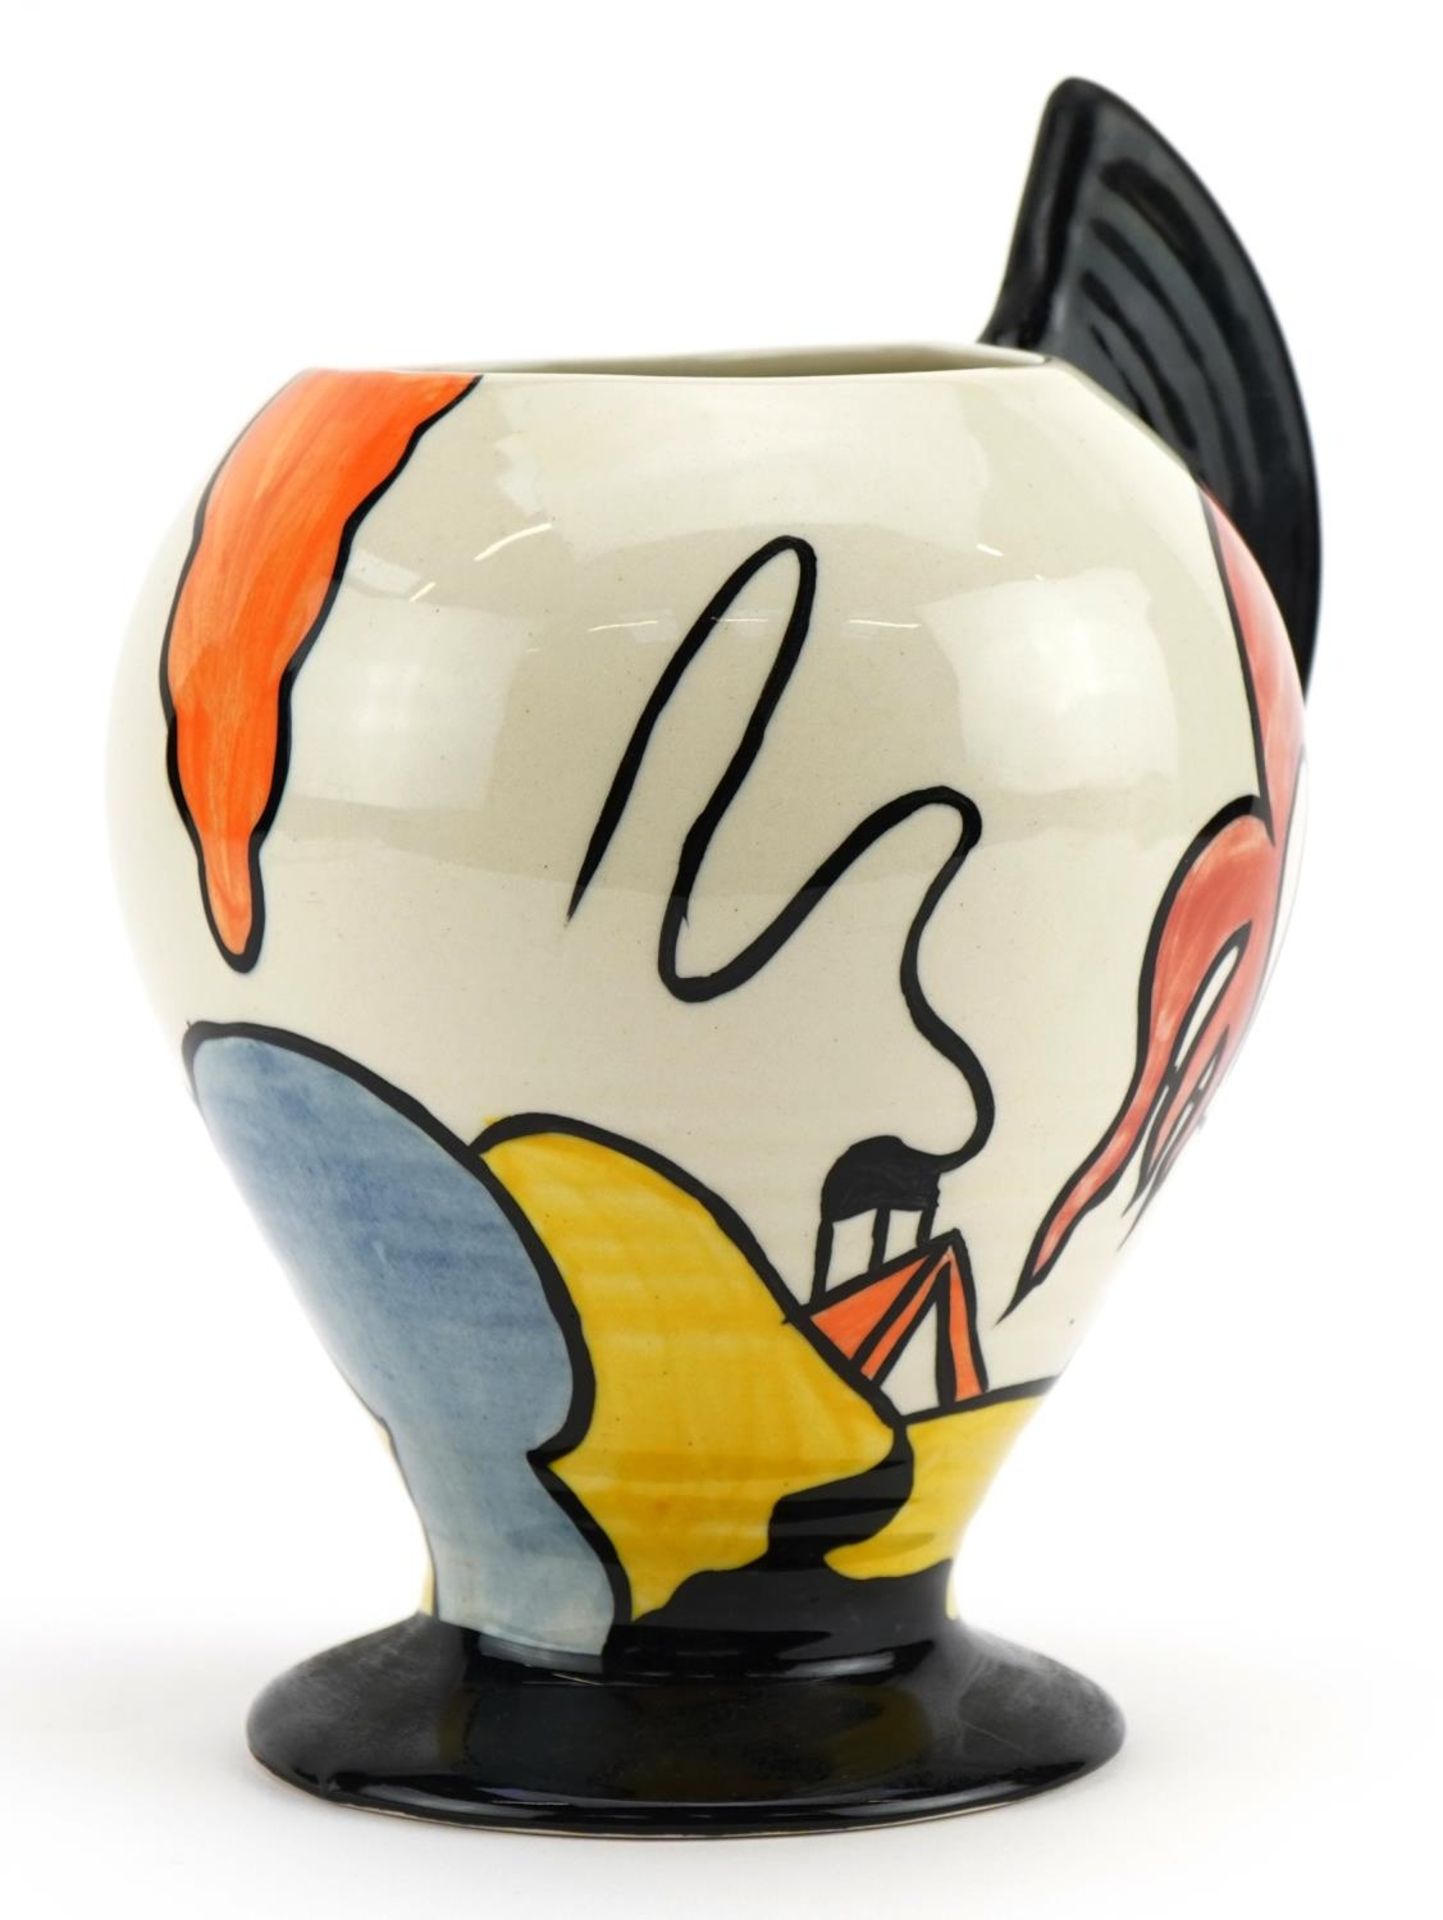 Lorna Bailey vase hand painted and inscribed The Dingle, Porthill to the base, 16.5cm high